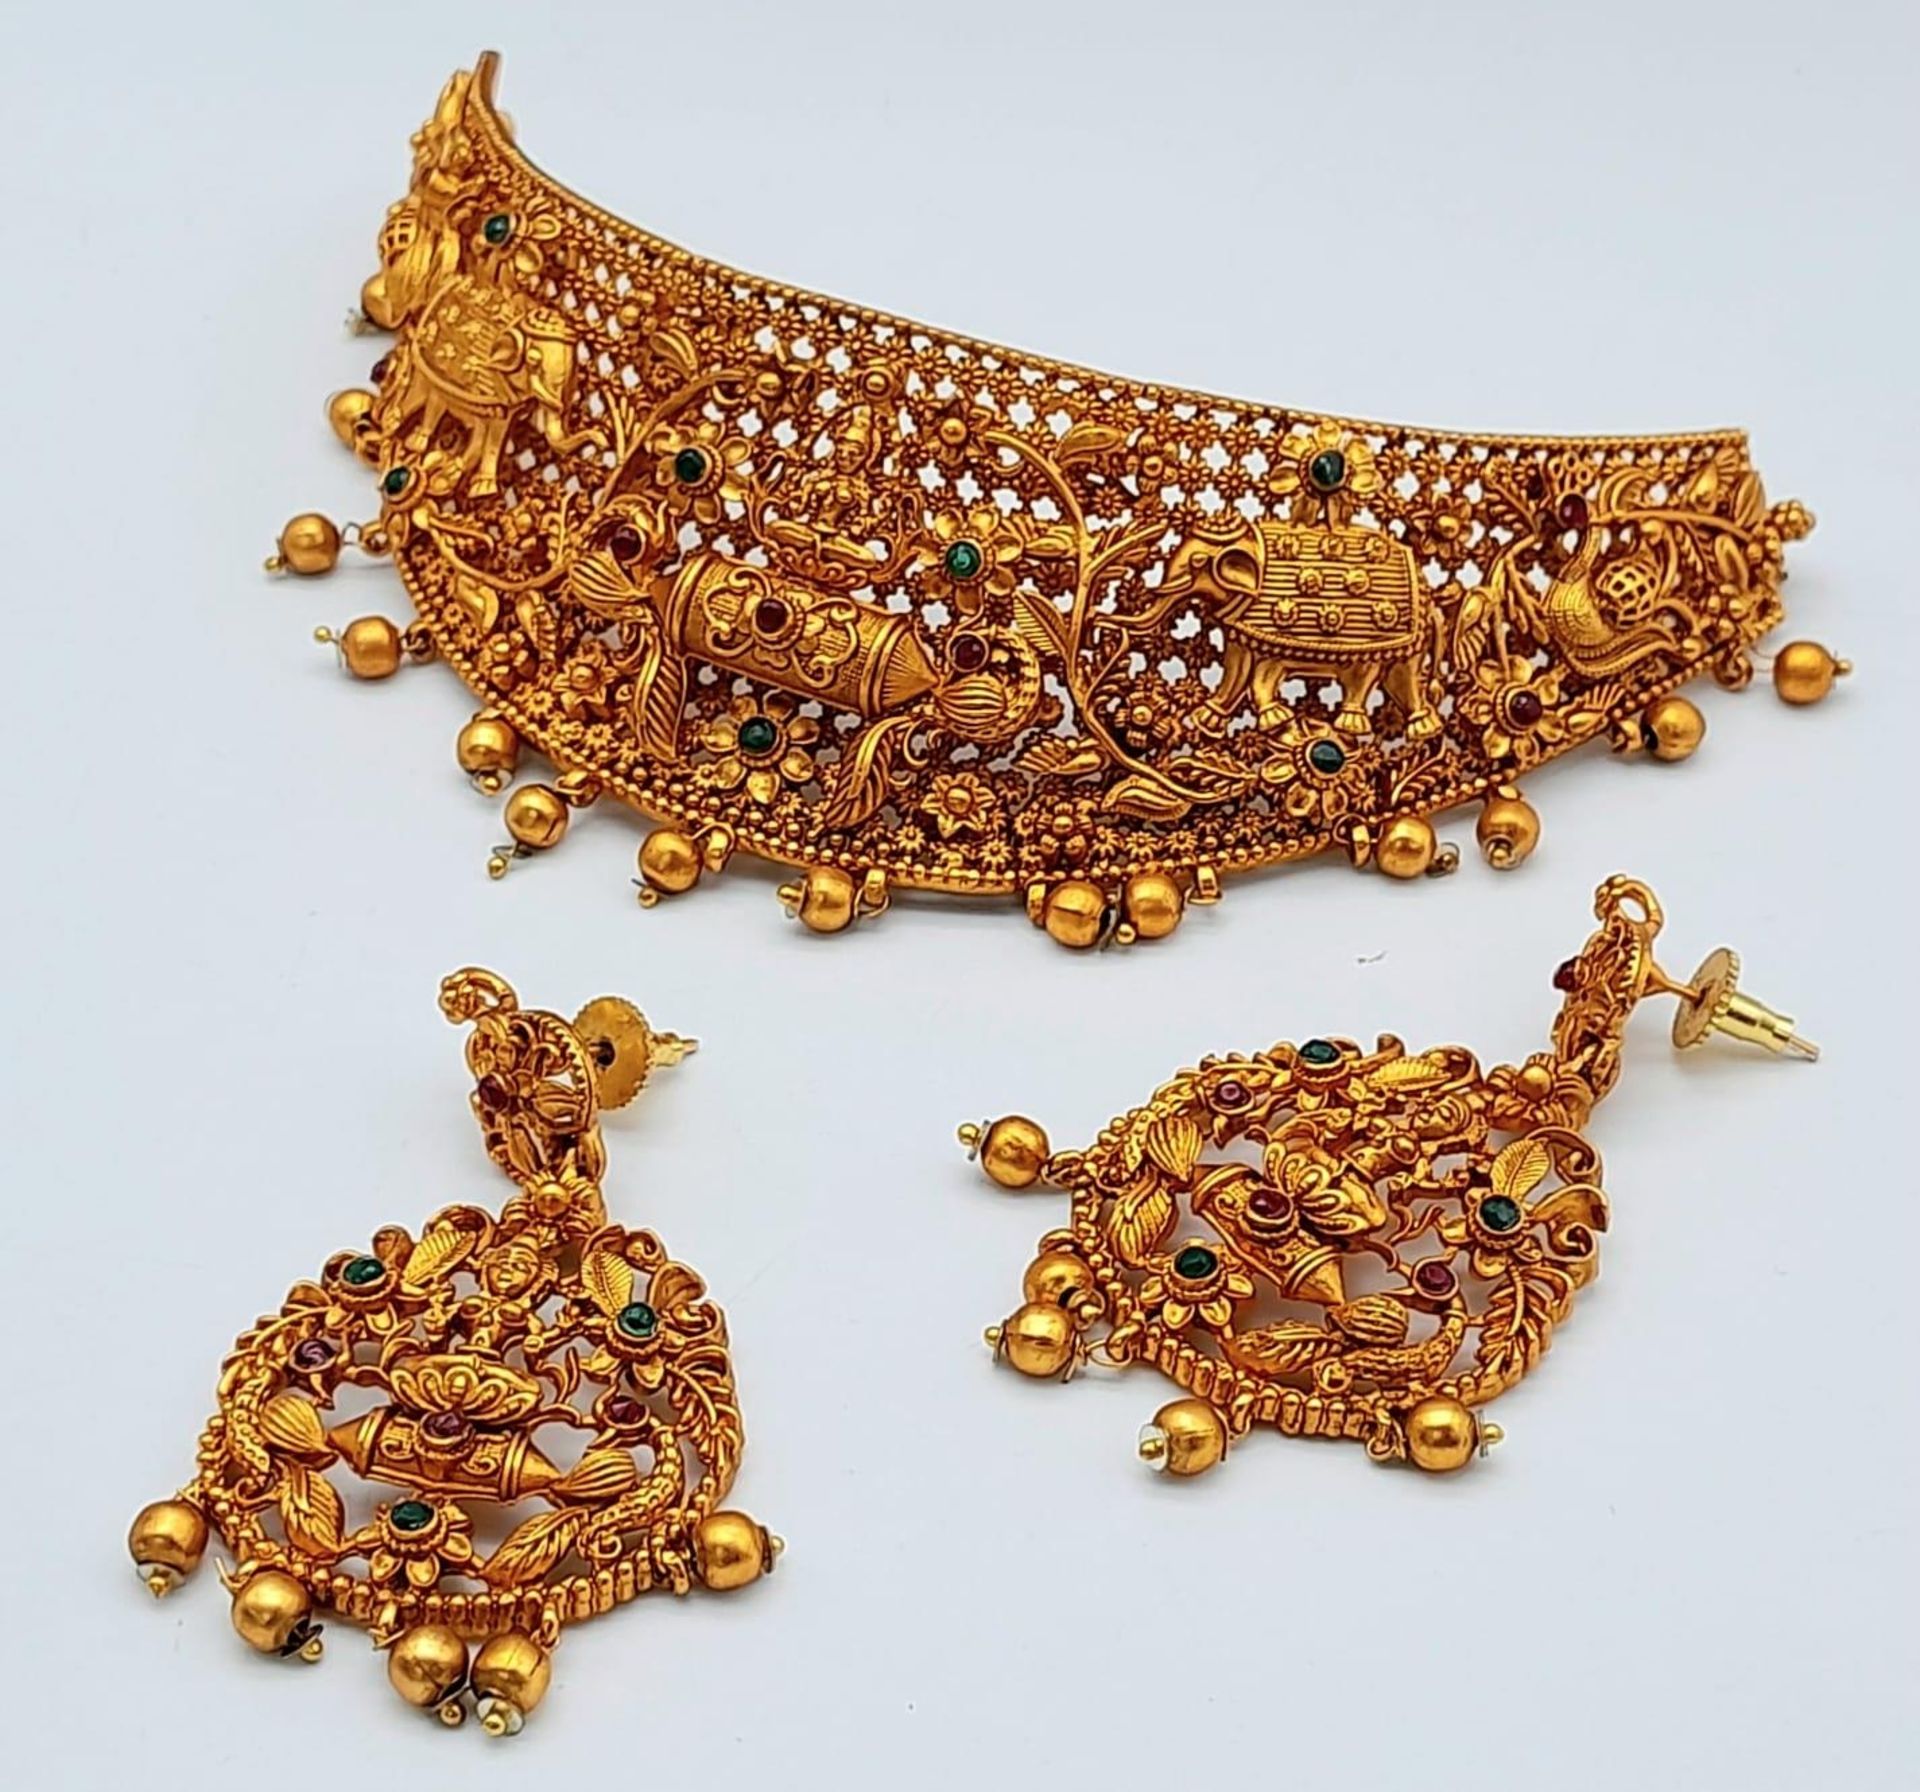 A South Indian traditional “Temple Jewellery” consisting of a necklace and matching earrings in an